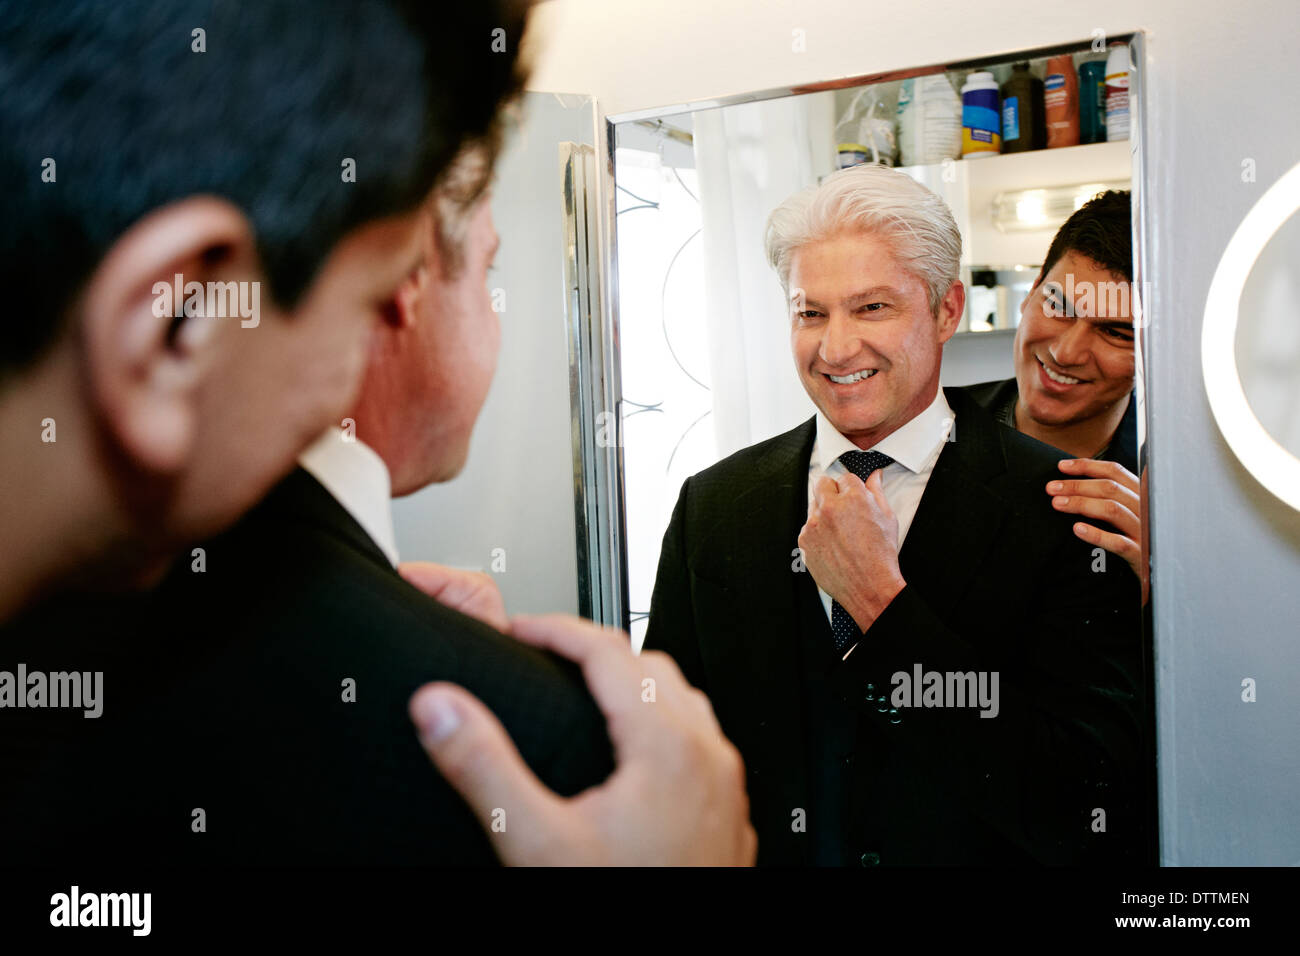 Homosexual couple smiling in mirror Stock Photo